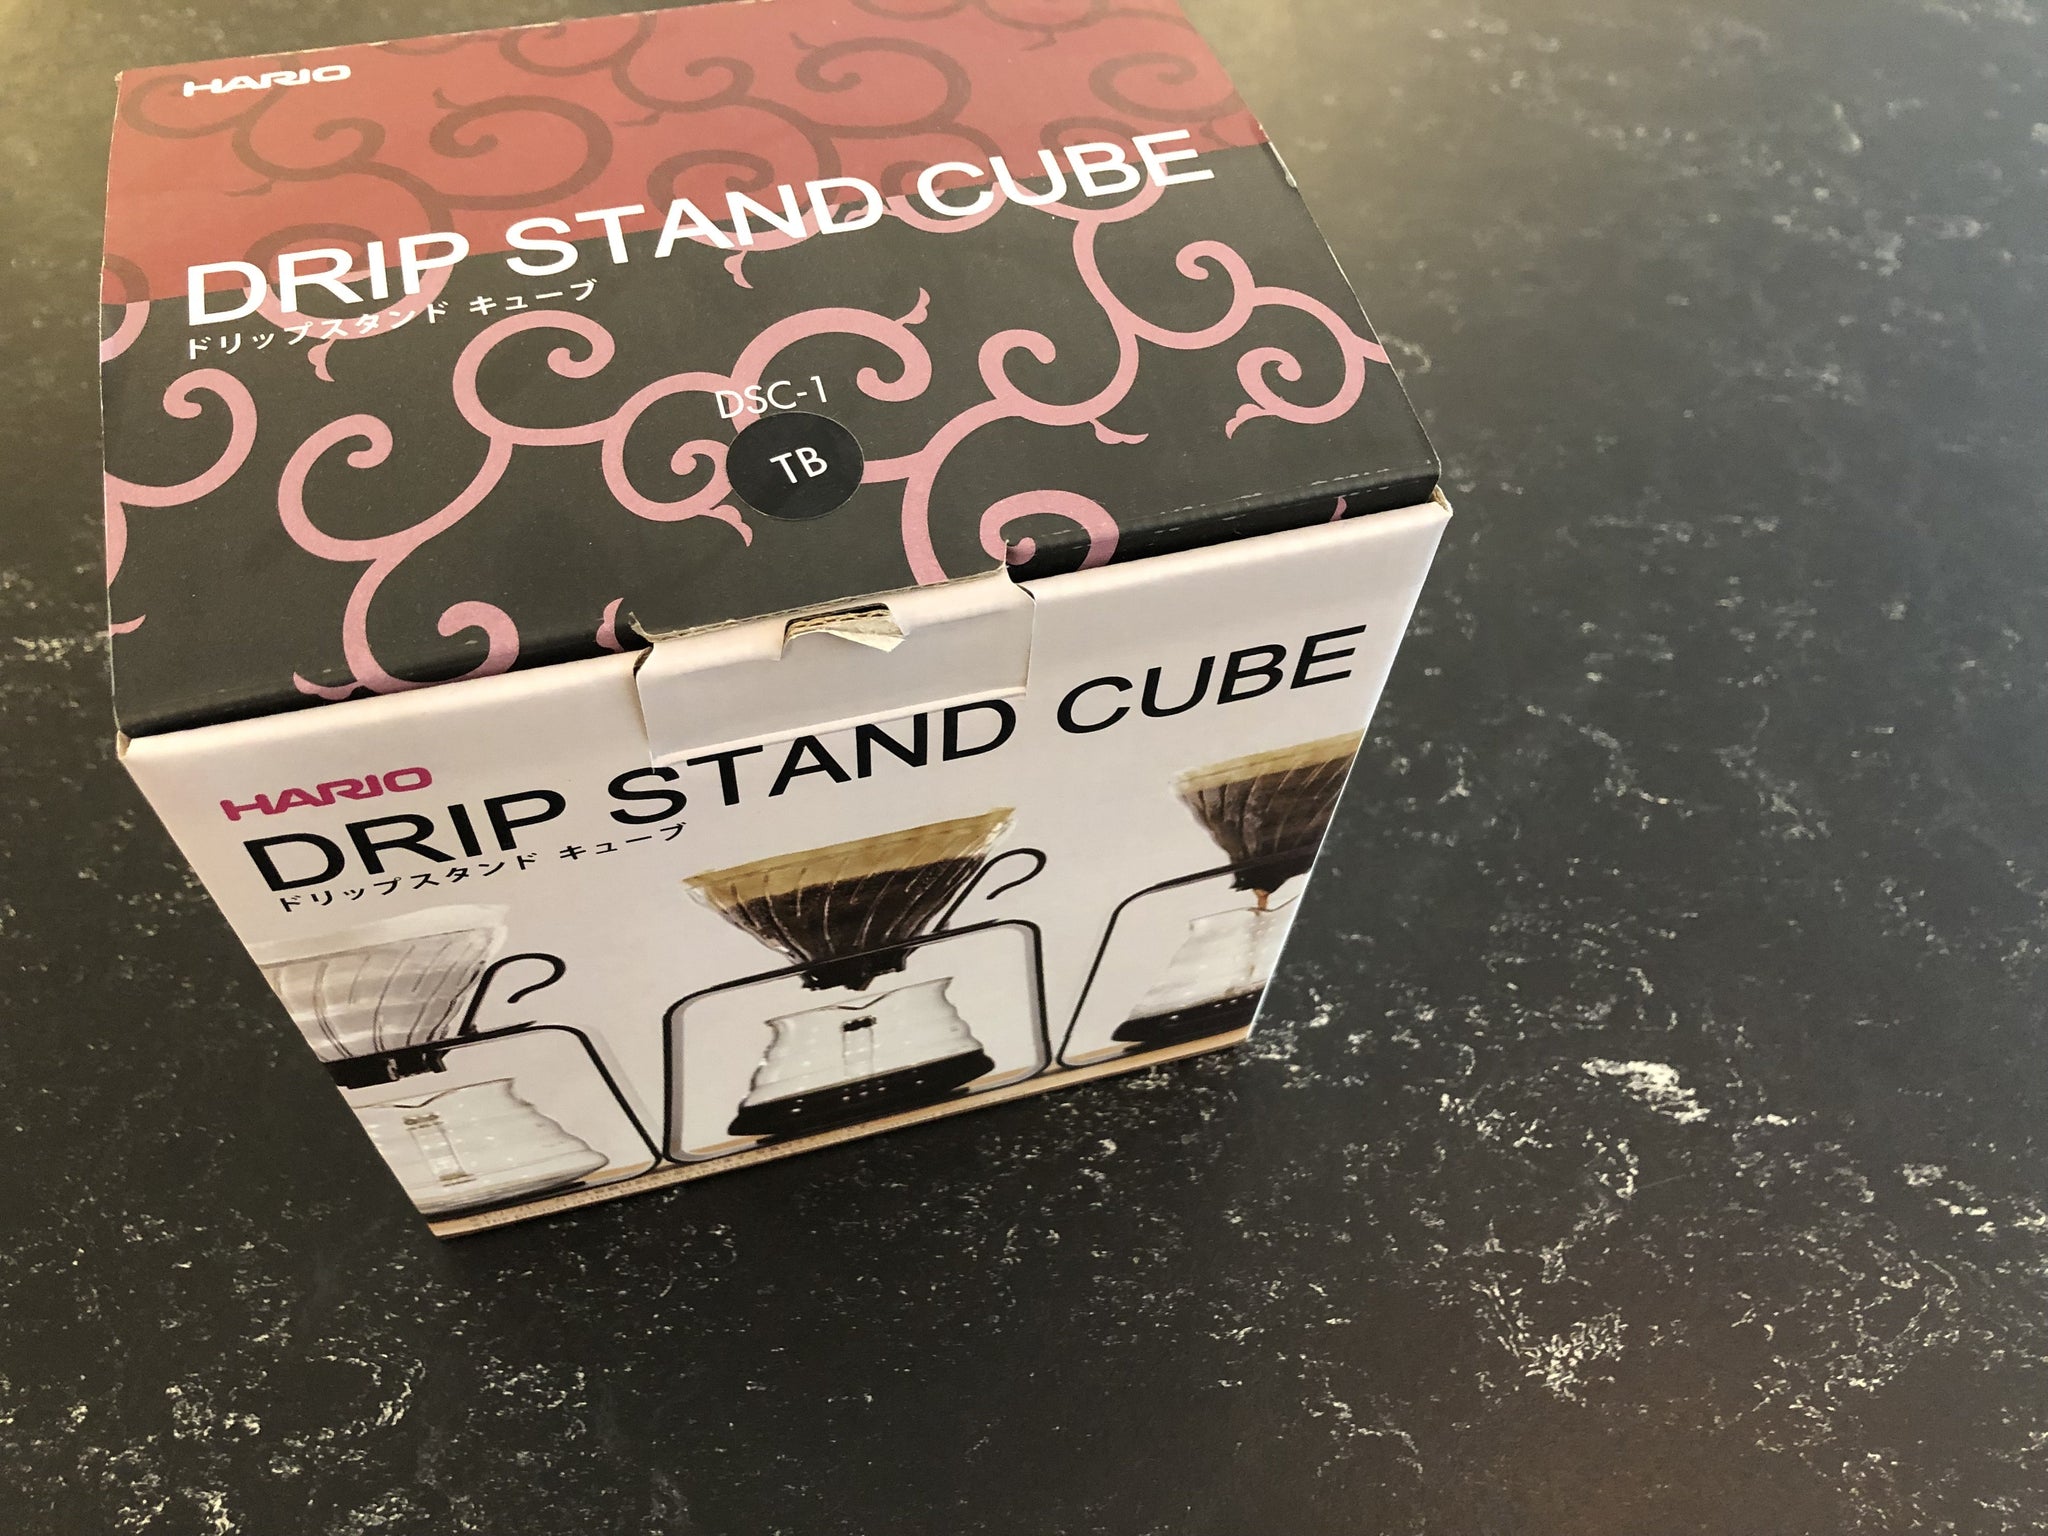 V60 cube drip stand